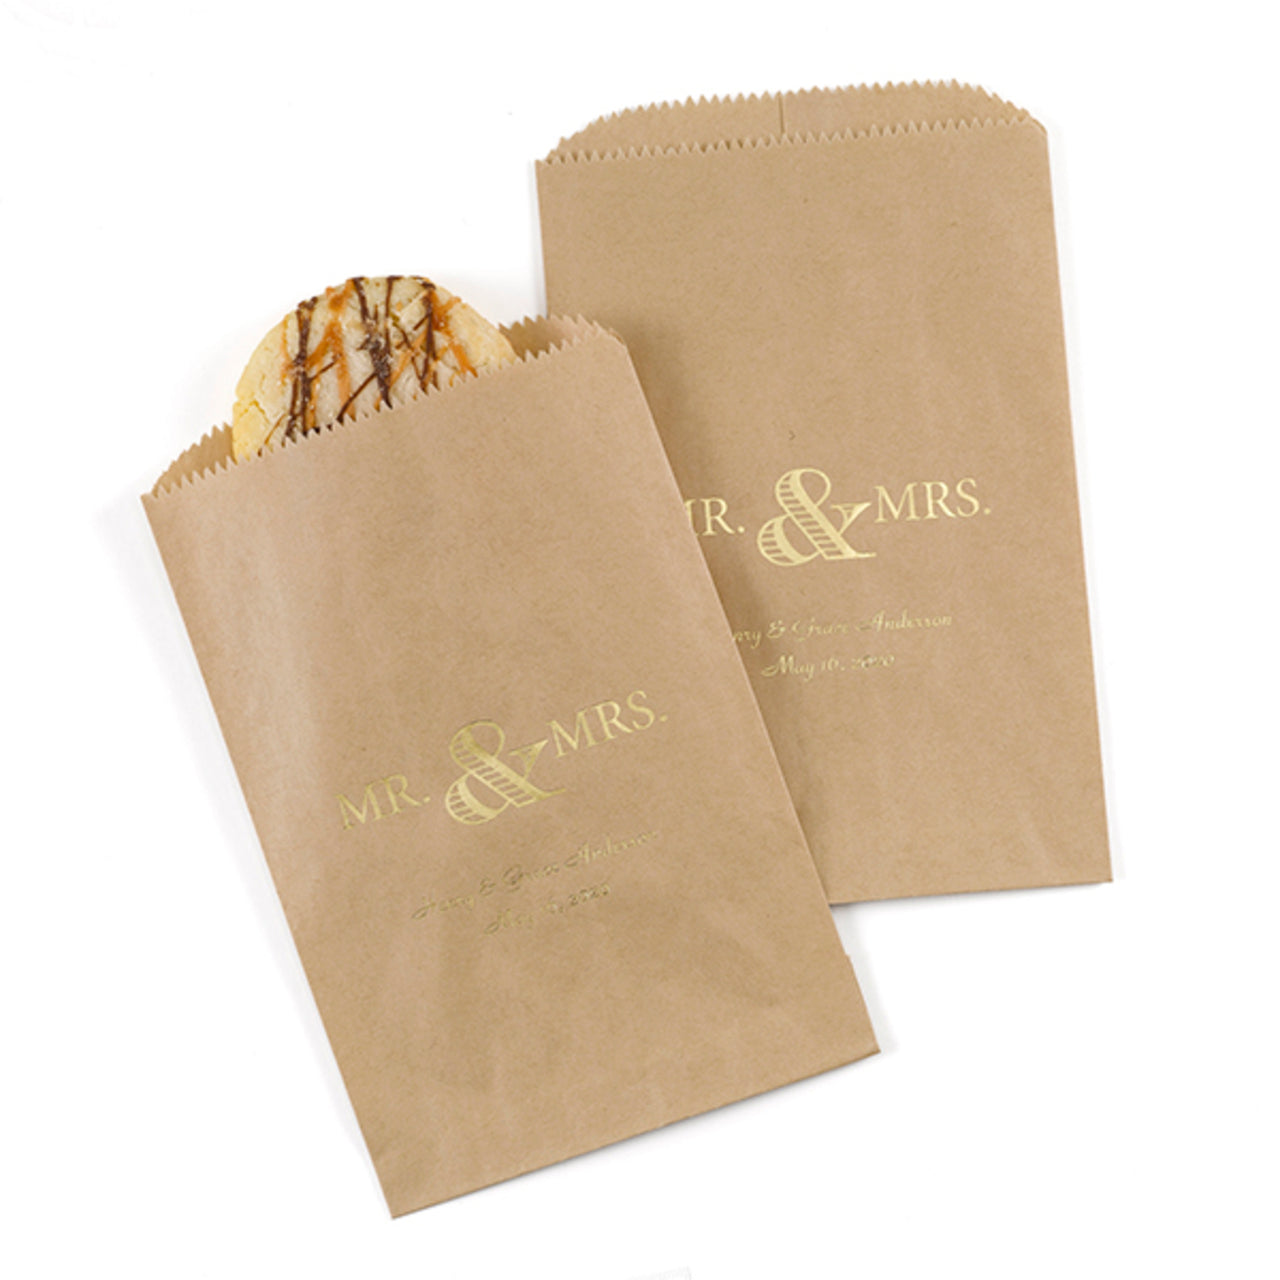 Personalized Mr. & Mrs. Treat Bags (Available in Multiple Colors) (Set of 50) - Alternate Image 5 | My Wedding Favors